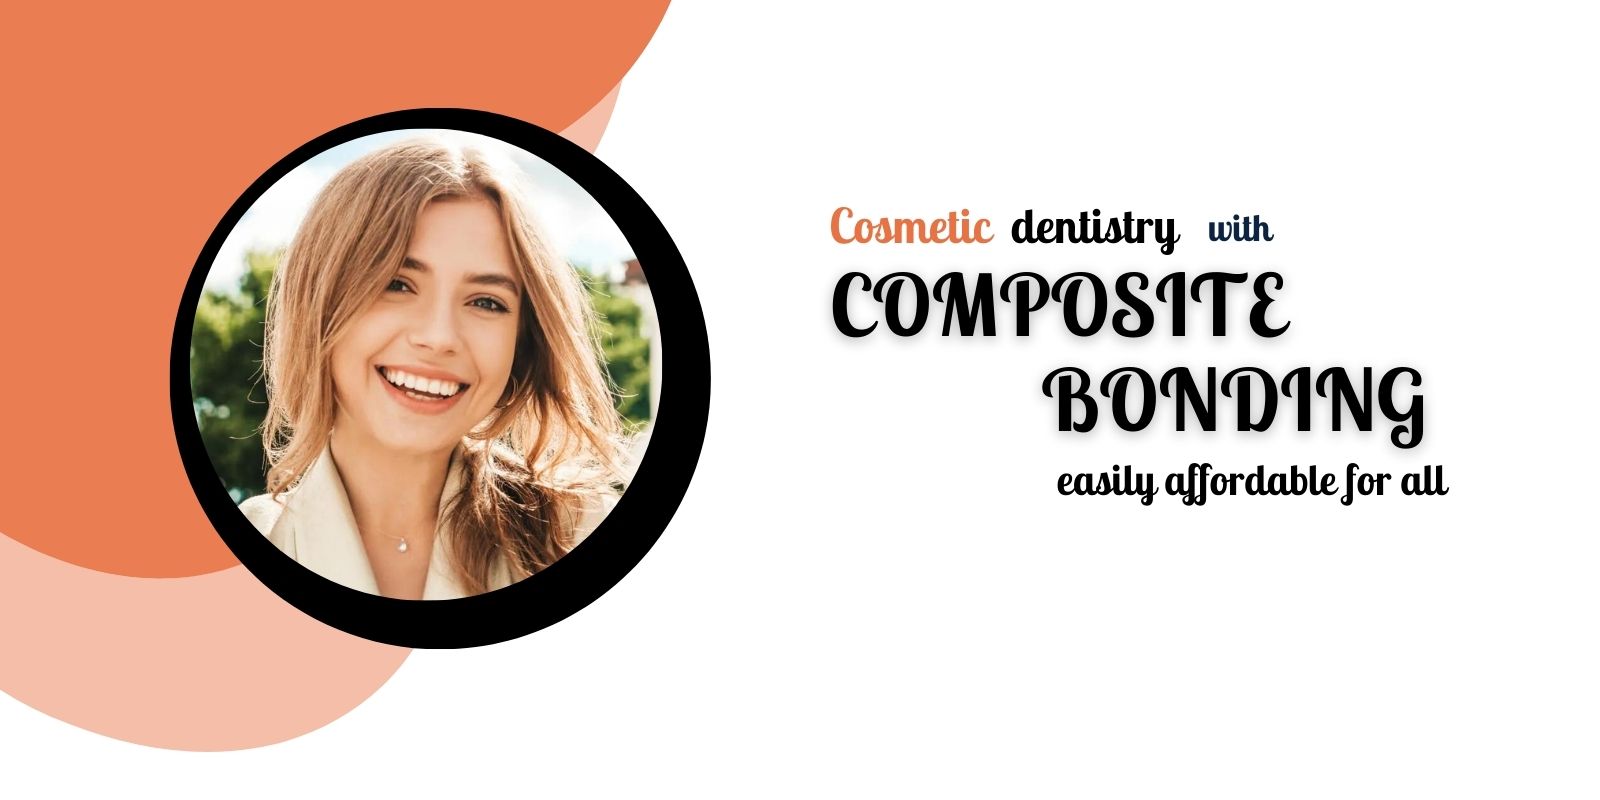 Cosmetic dentistry with composite bonding easily affordable for all - Top Viral News Hub